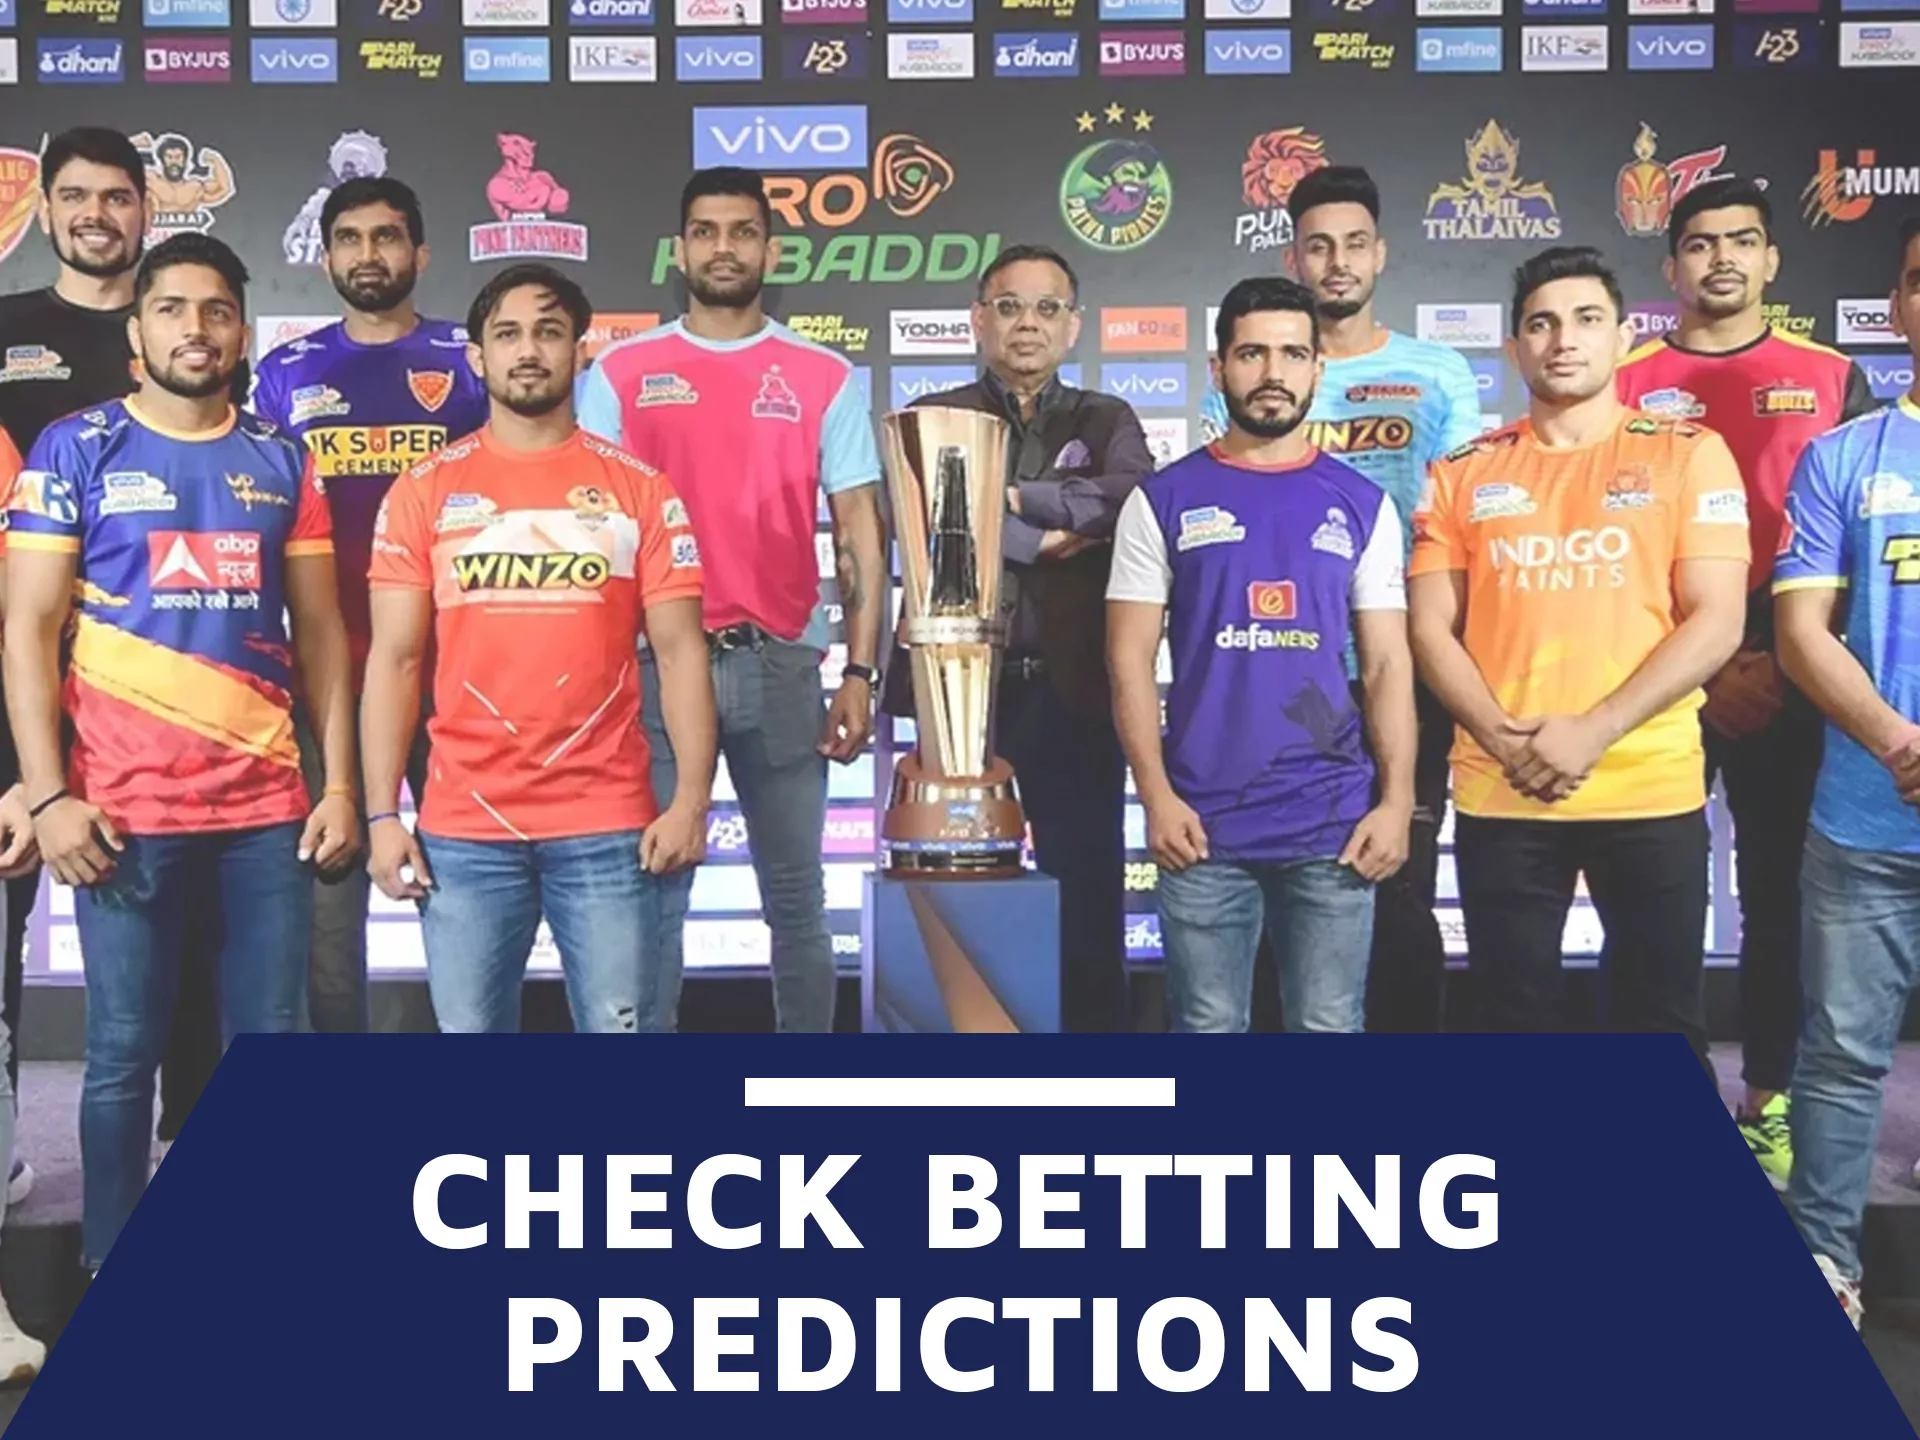 Check betting predictions for confident betting.